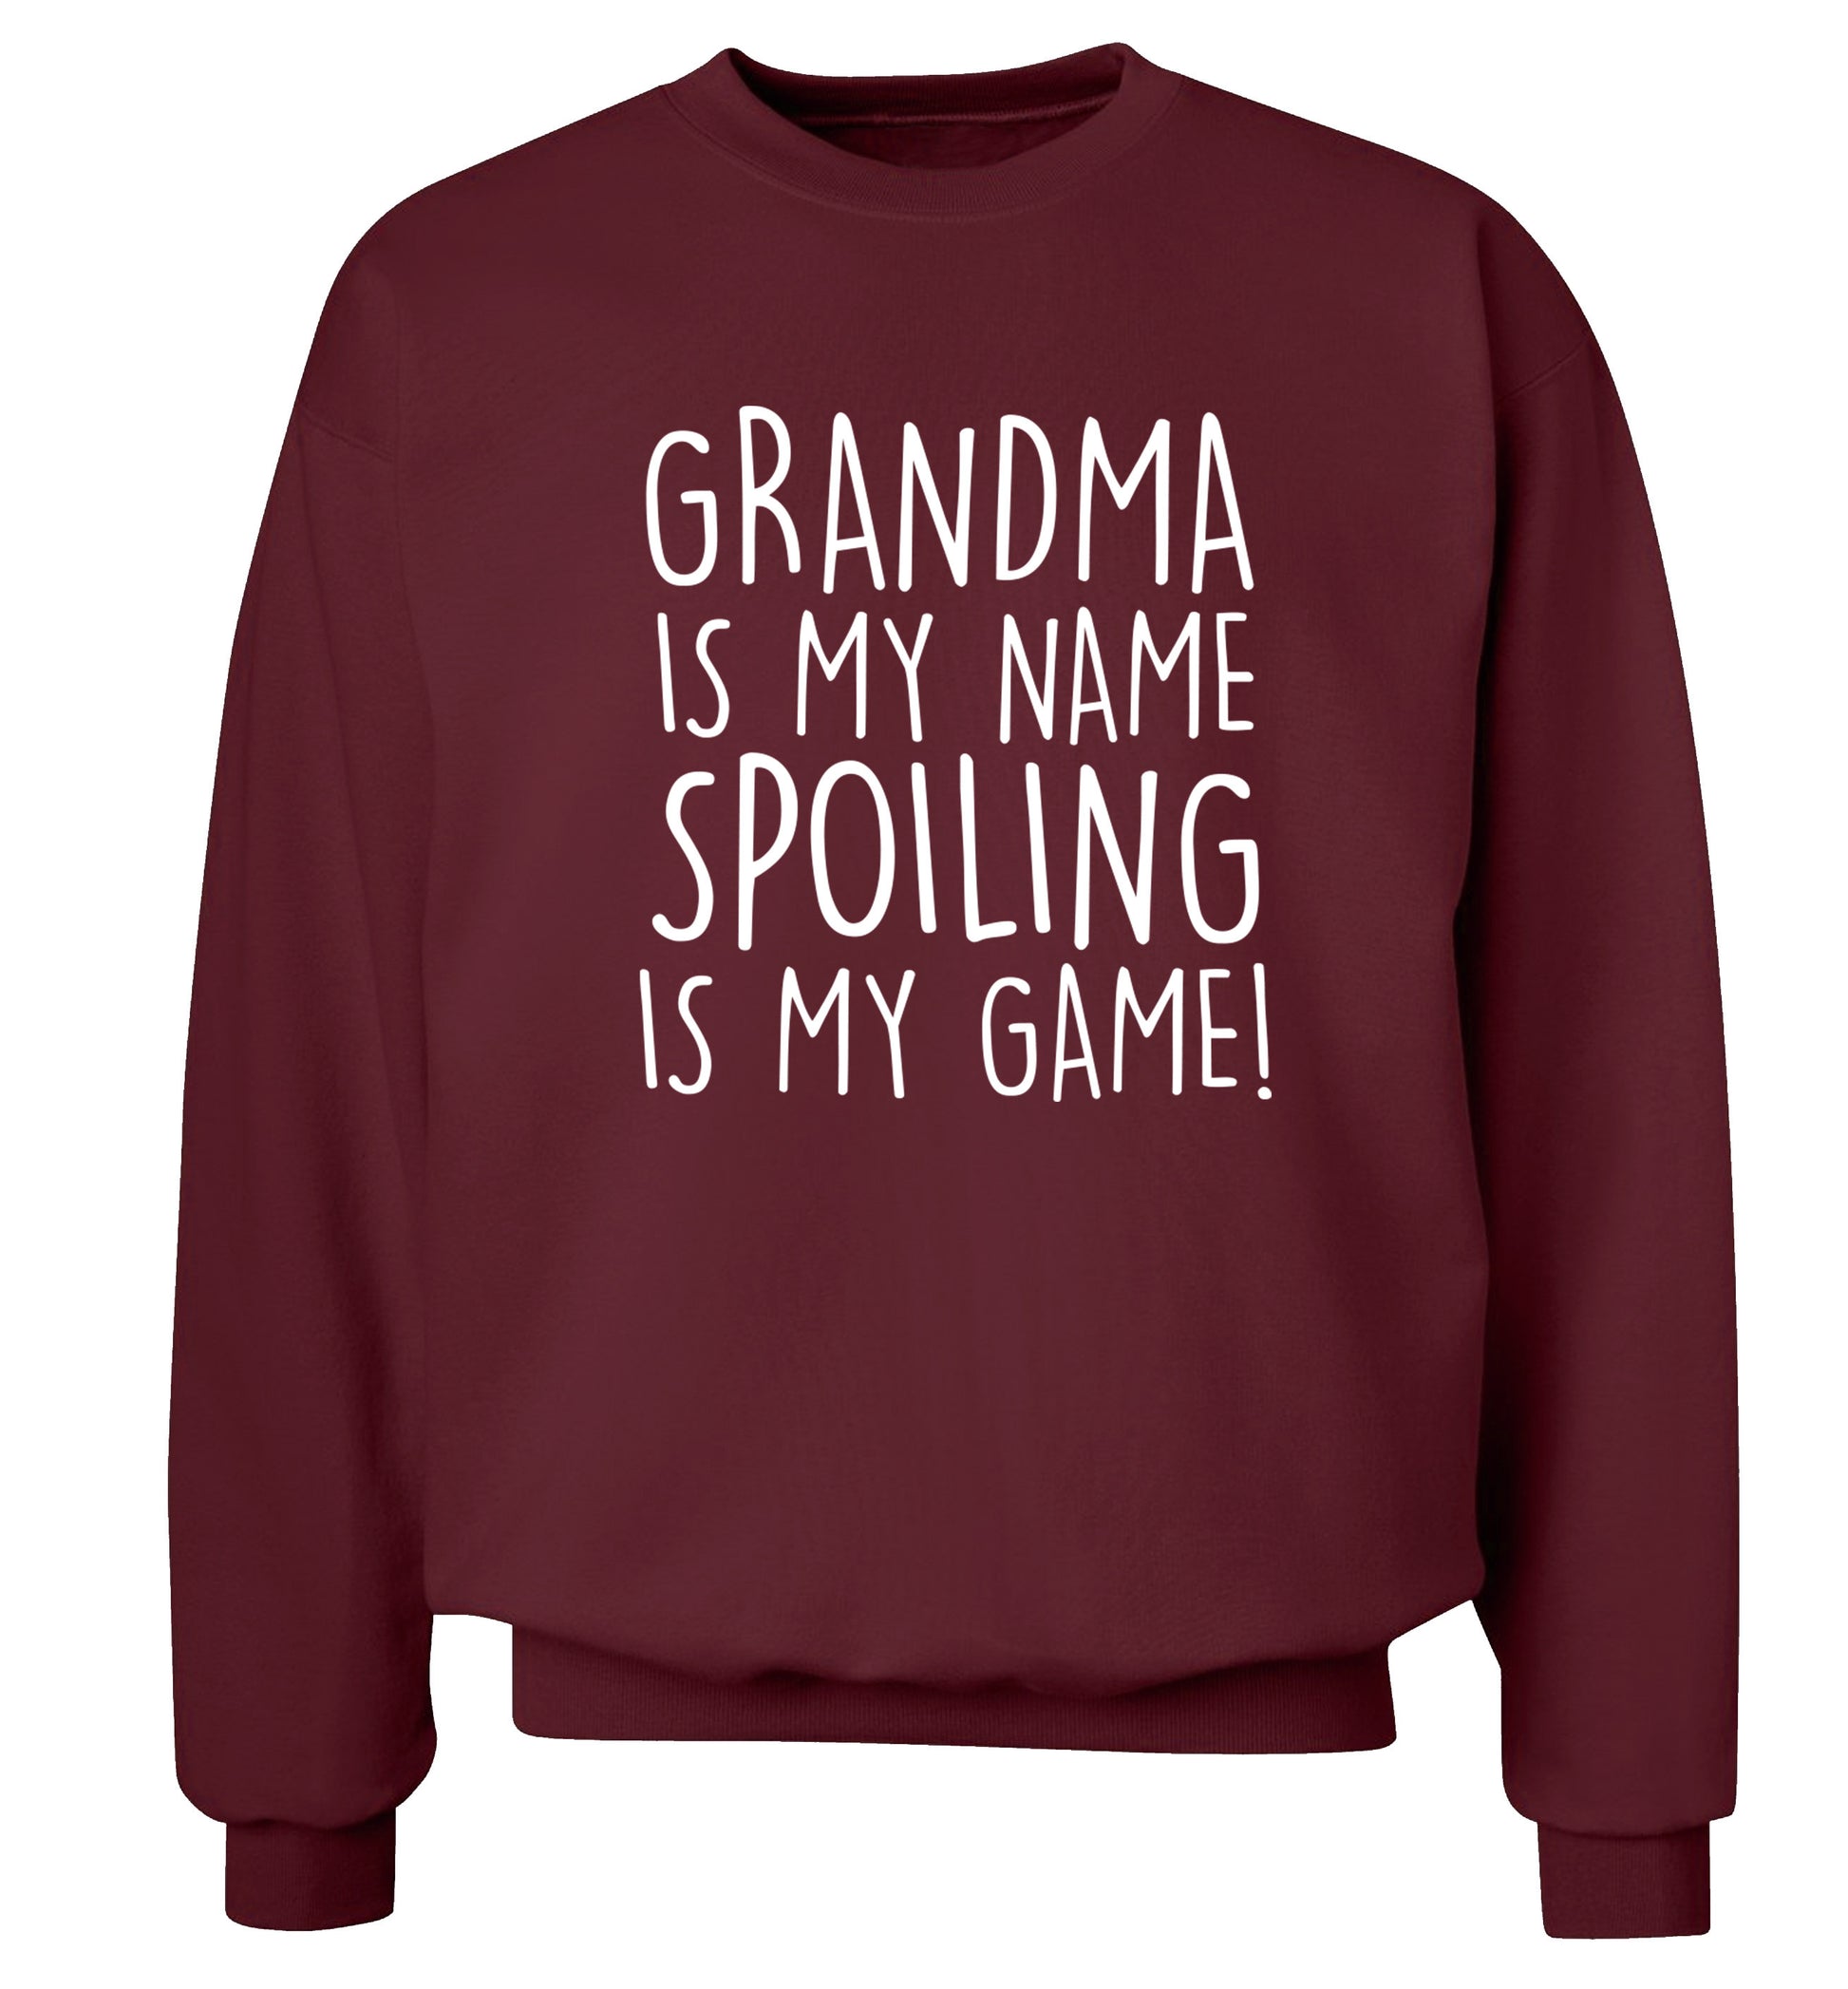 Grandma is my name, spoiling is my game Adult's unisex maroon Sweater 2XL